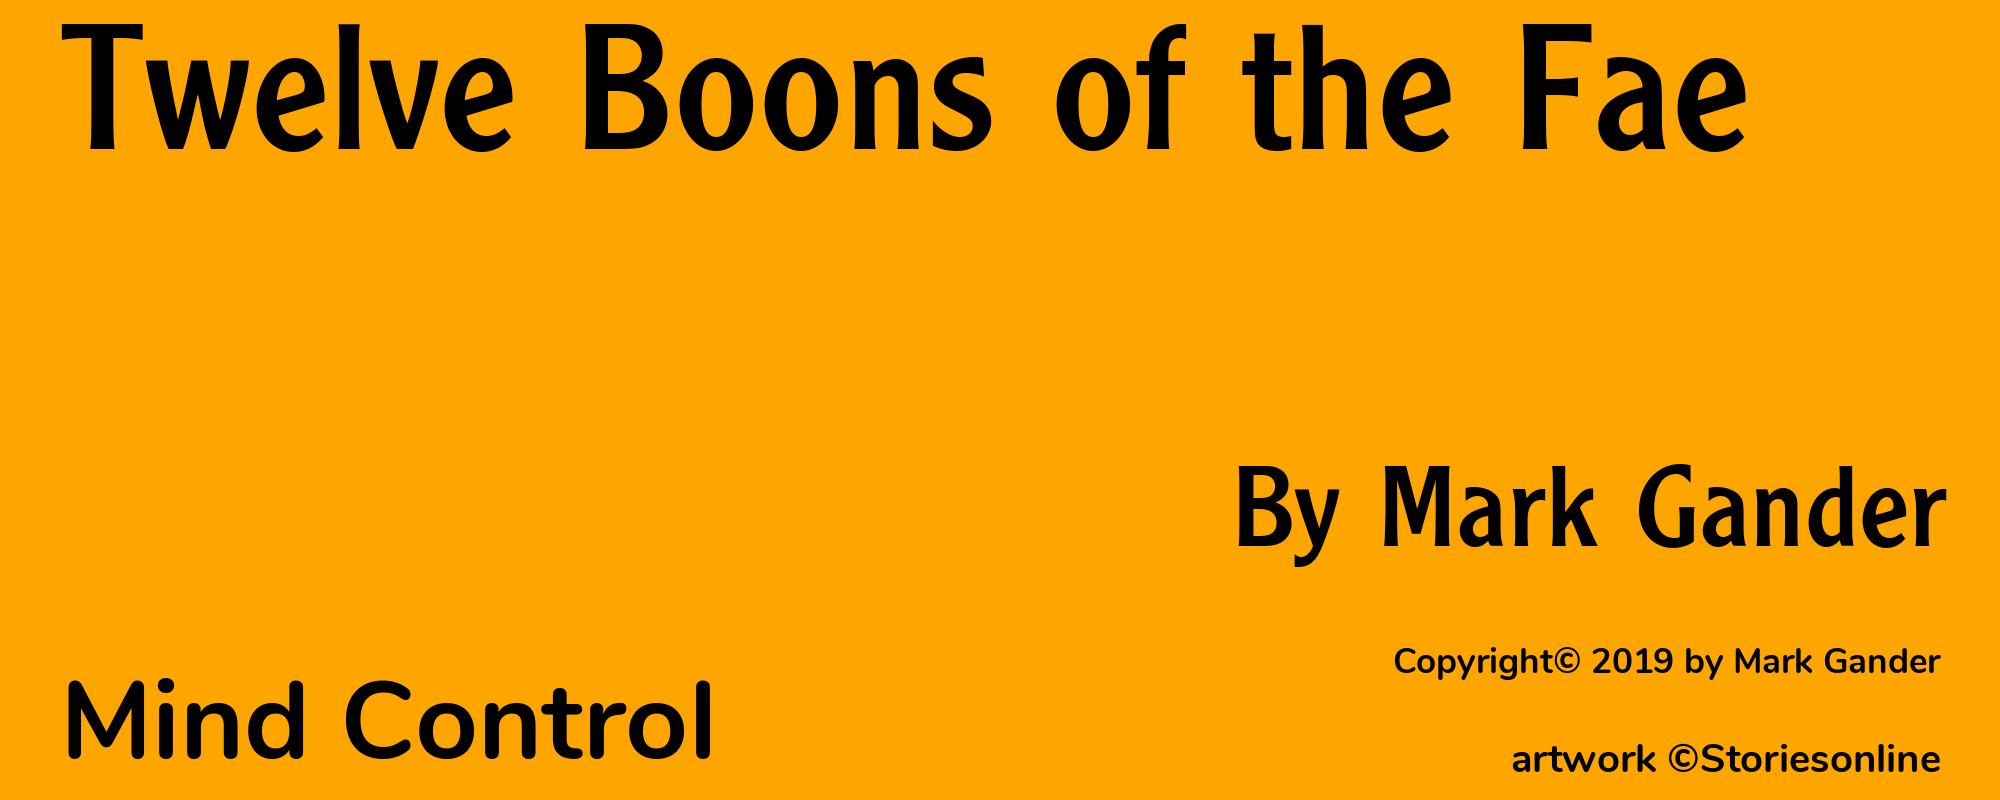 Twelve Boons of the Fae - Cover